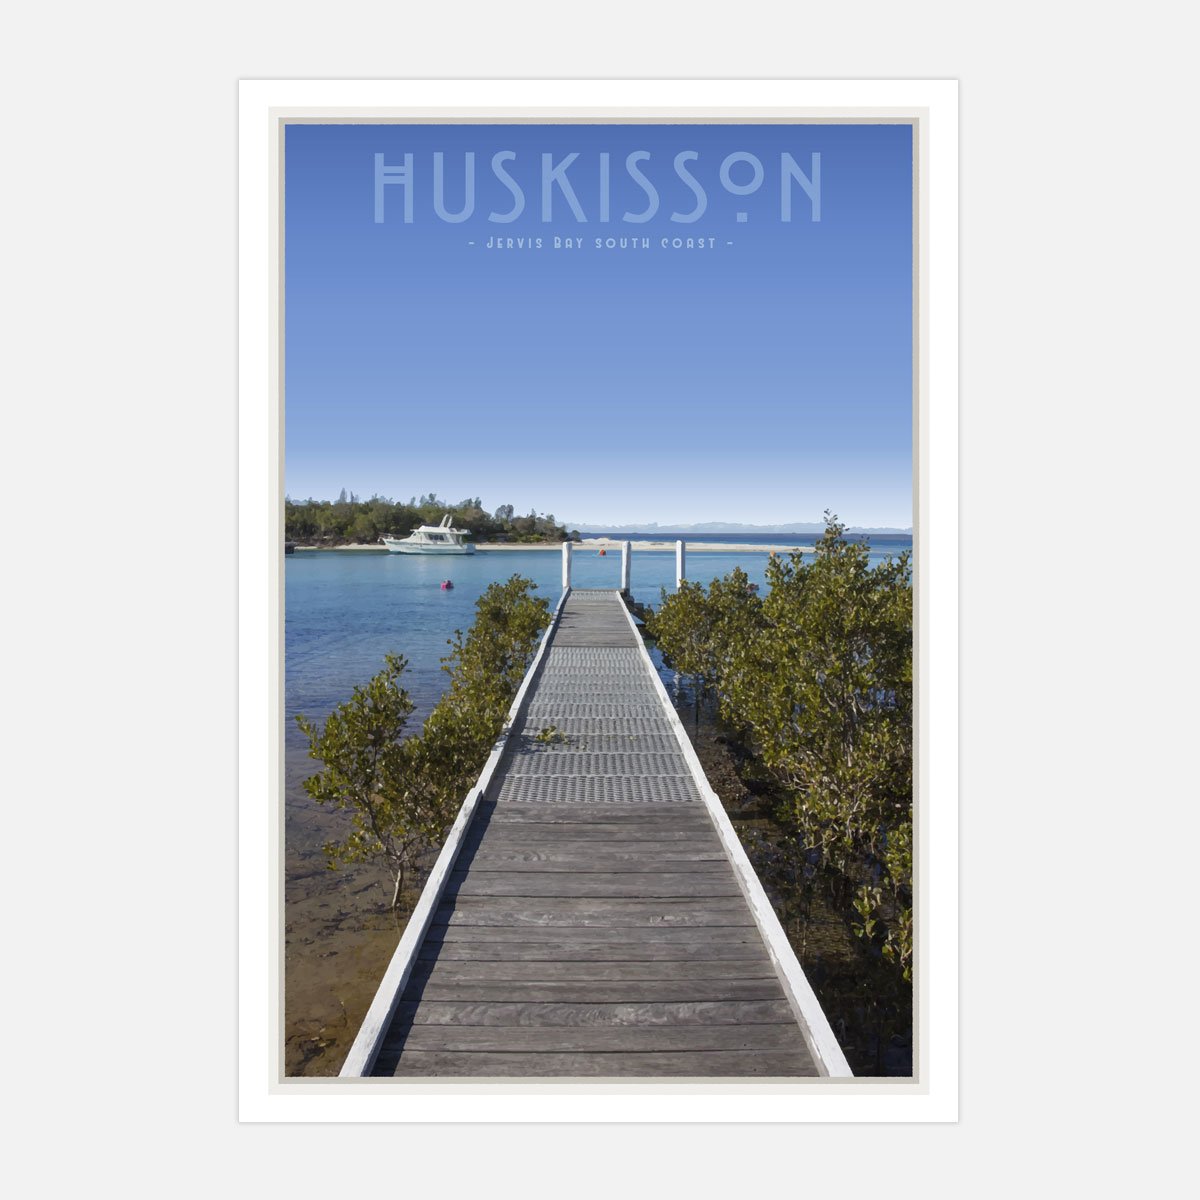 Huskisson vintage travel style print by places we luv